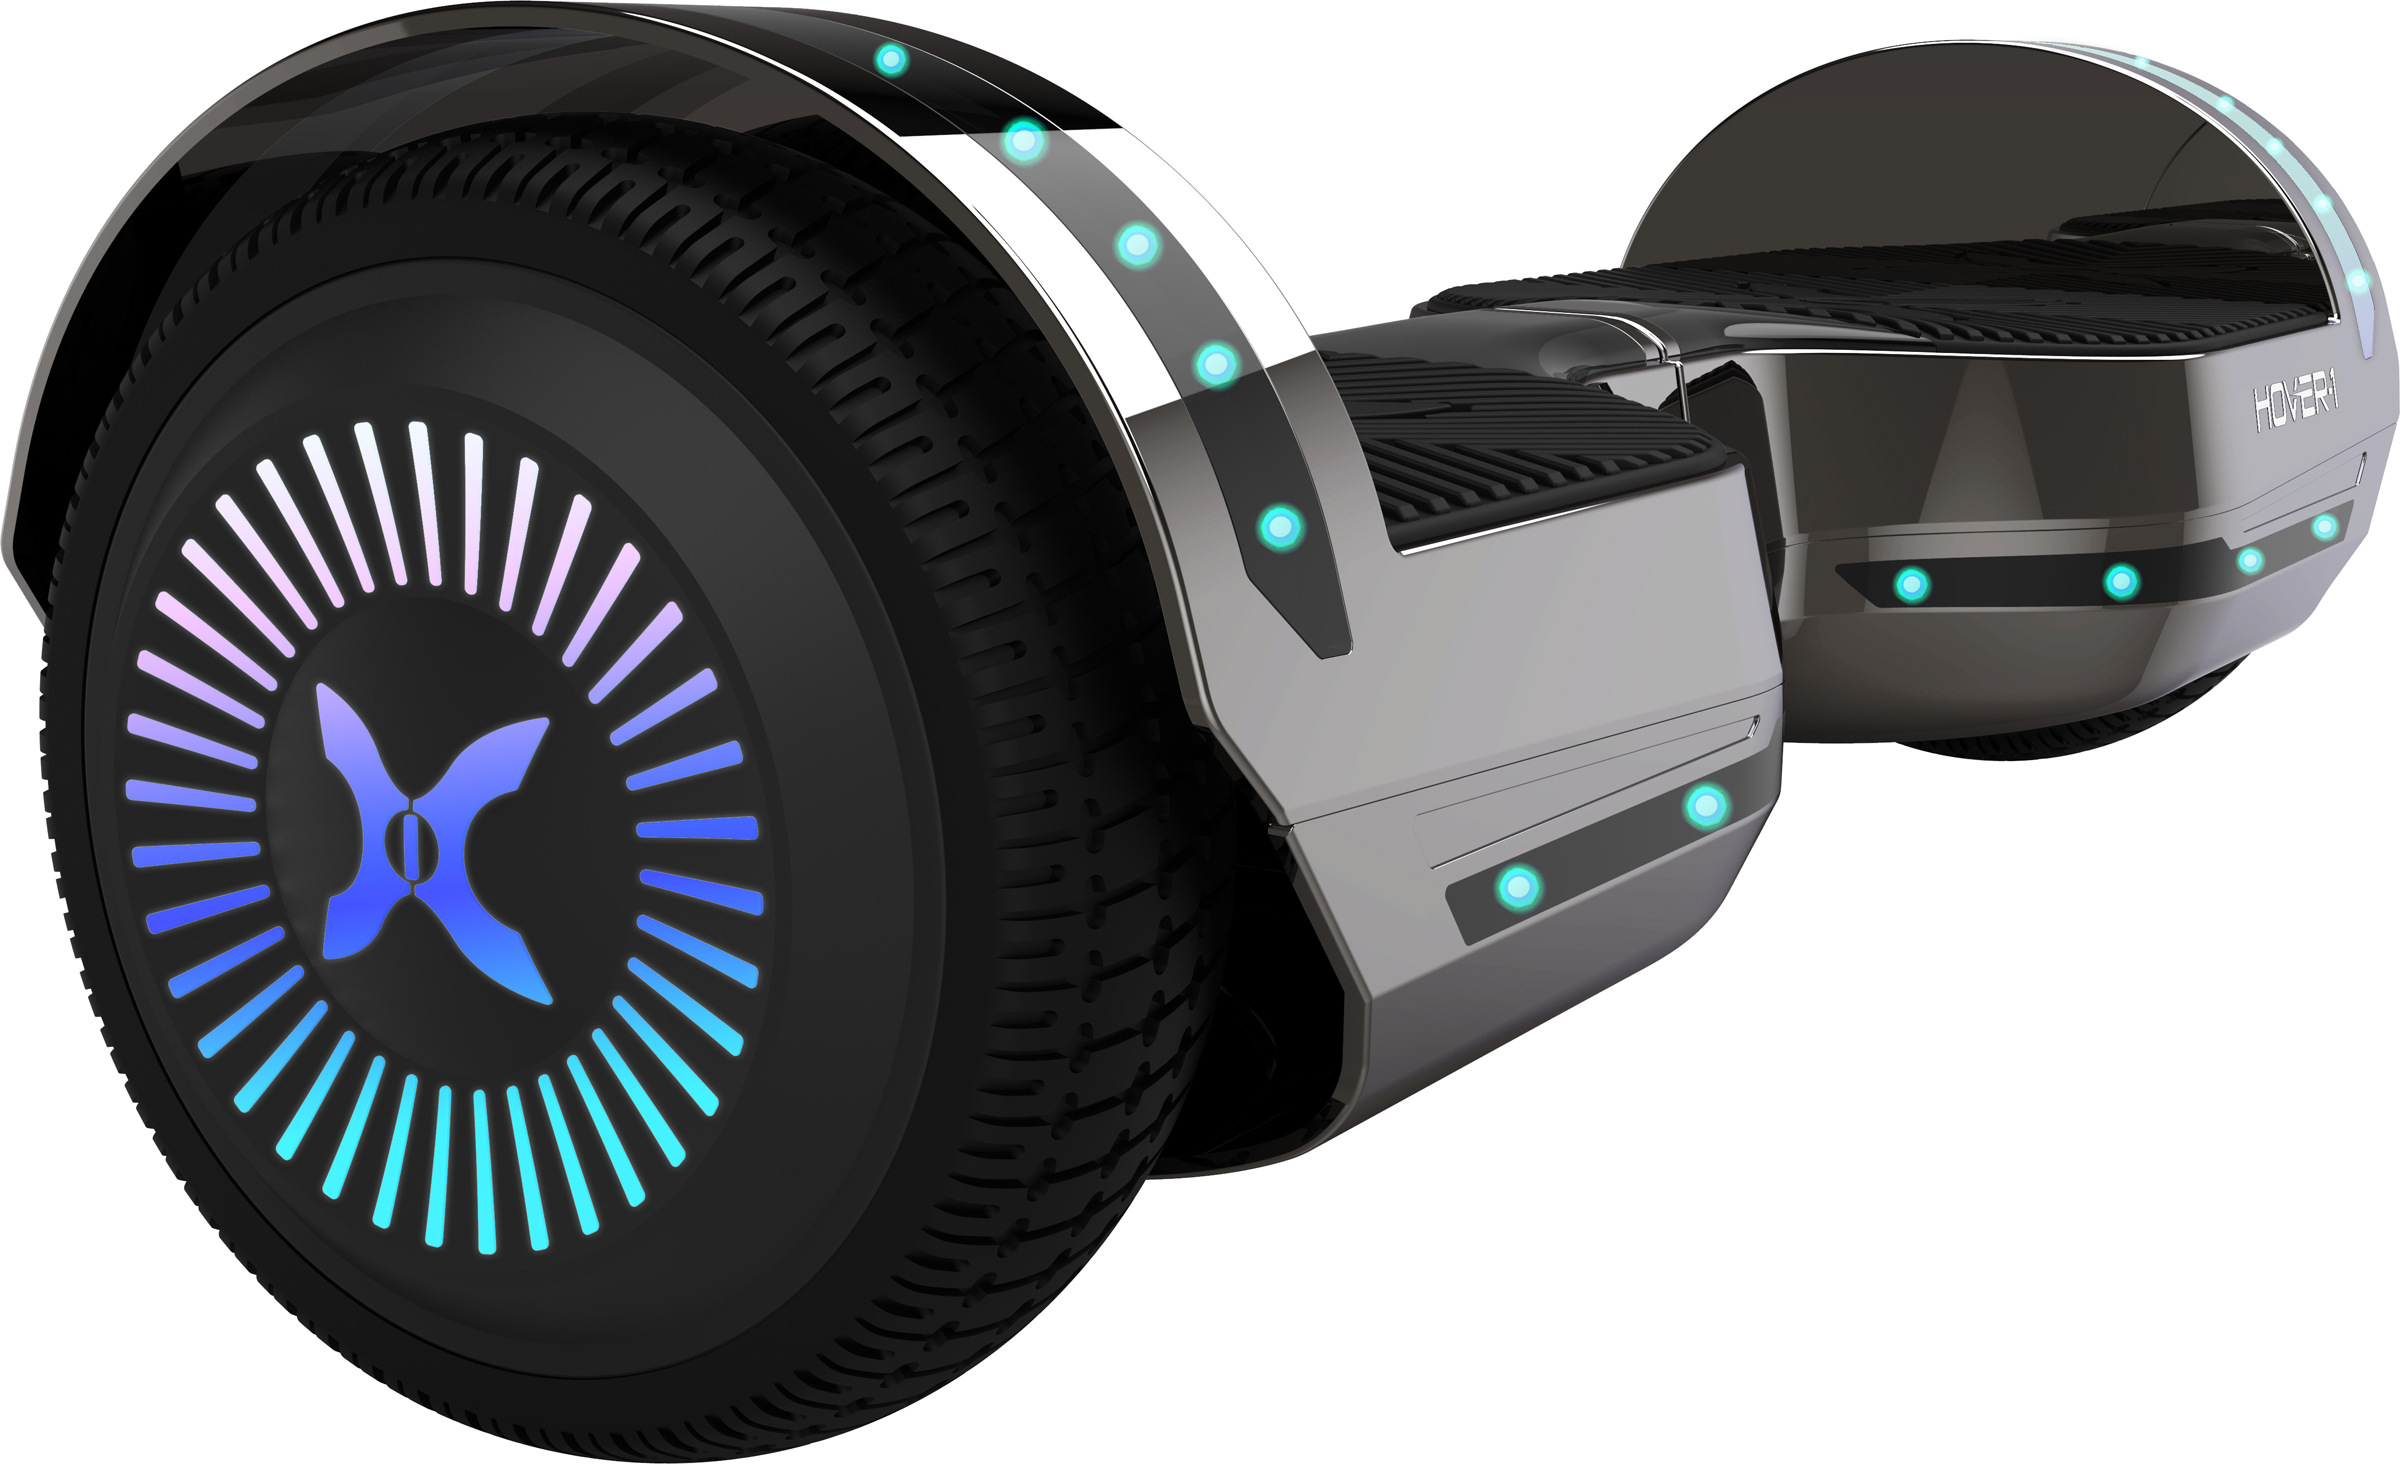 Hover-1 Chrome 7 Mph Hoverboard with LED Lights and Bluetooth Speaker, 6.5 In. Tires, 220 Lbs. Max Weight, Gunmetal - image 2 of 8